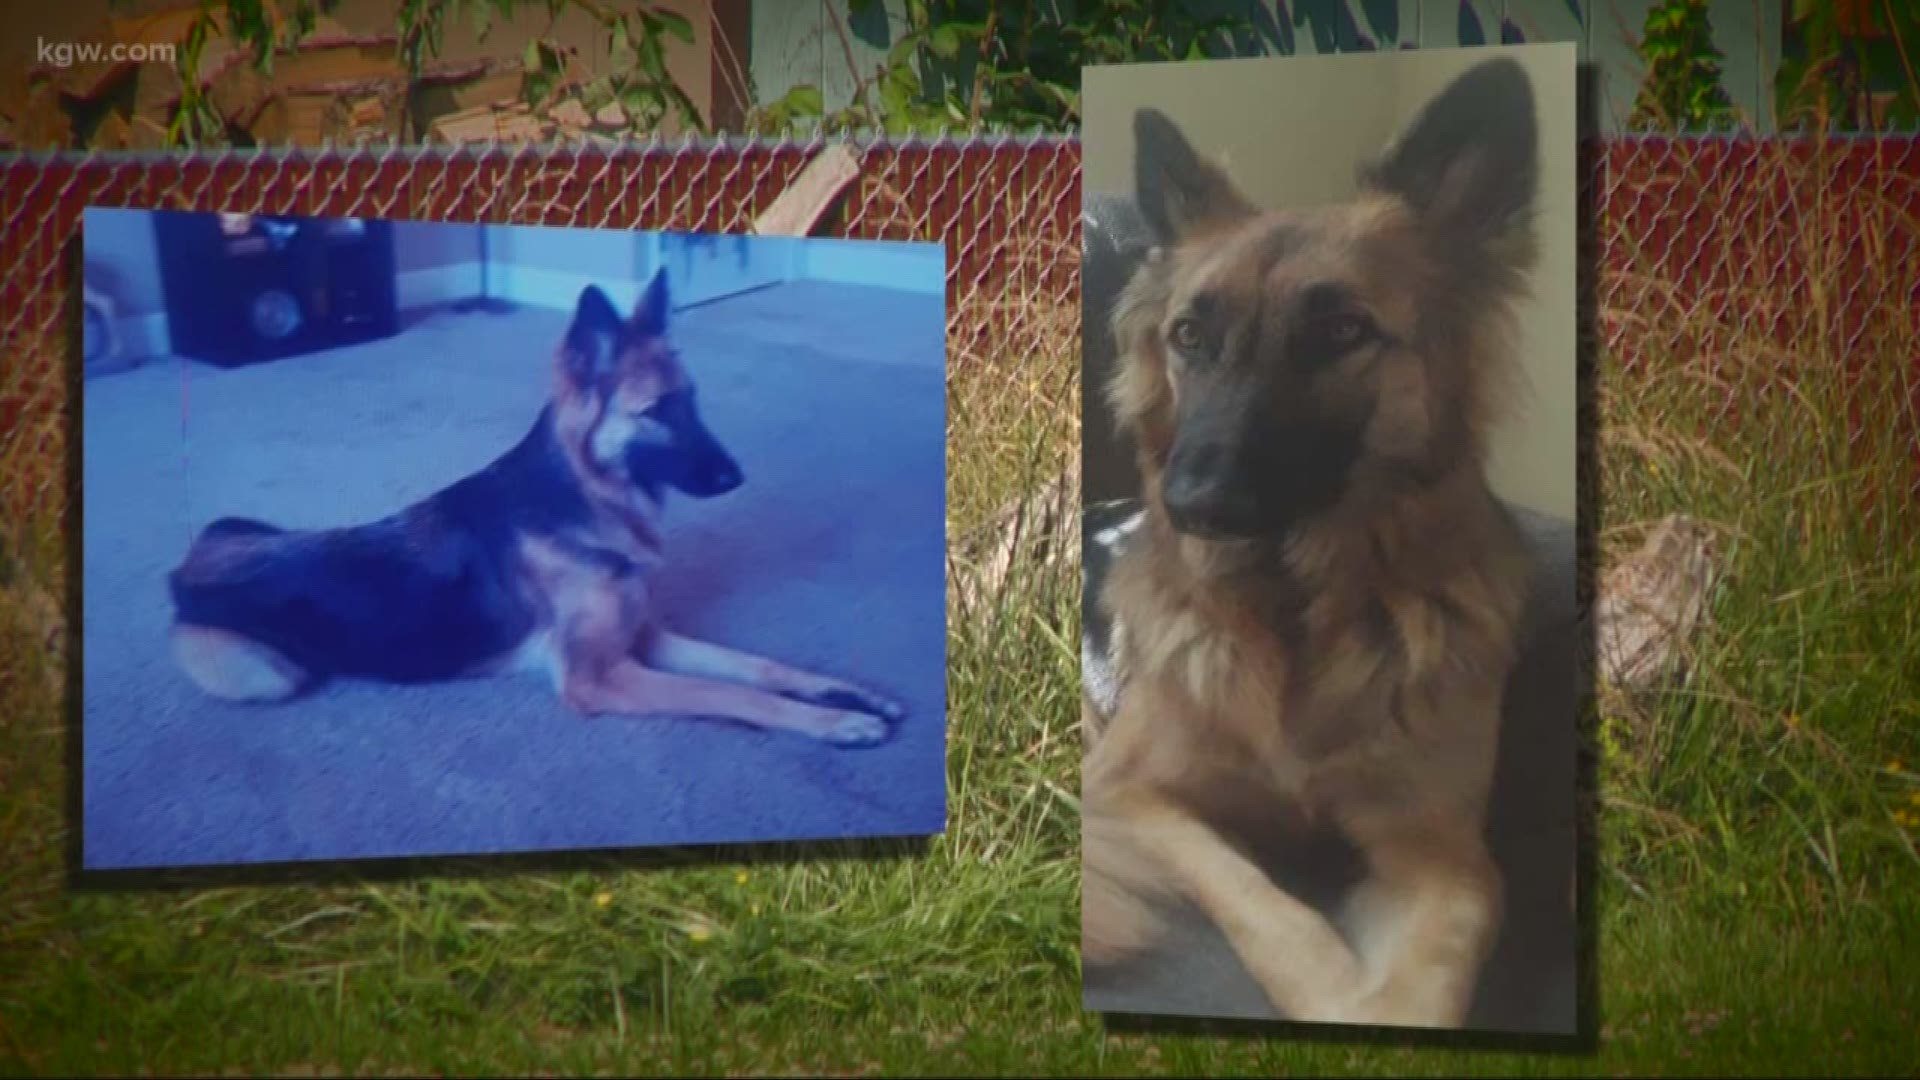 A Milwaukie man is searching for his service dog that went missing early Saturday morning.